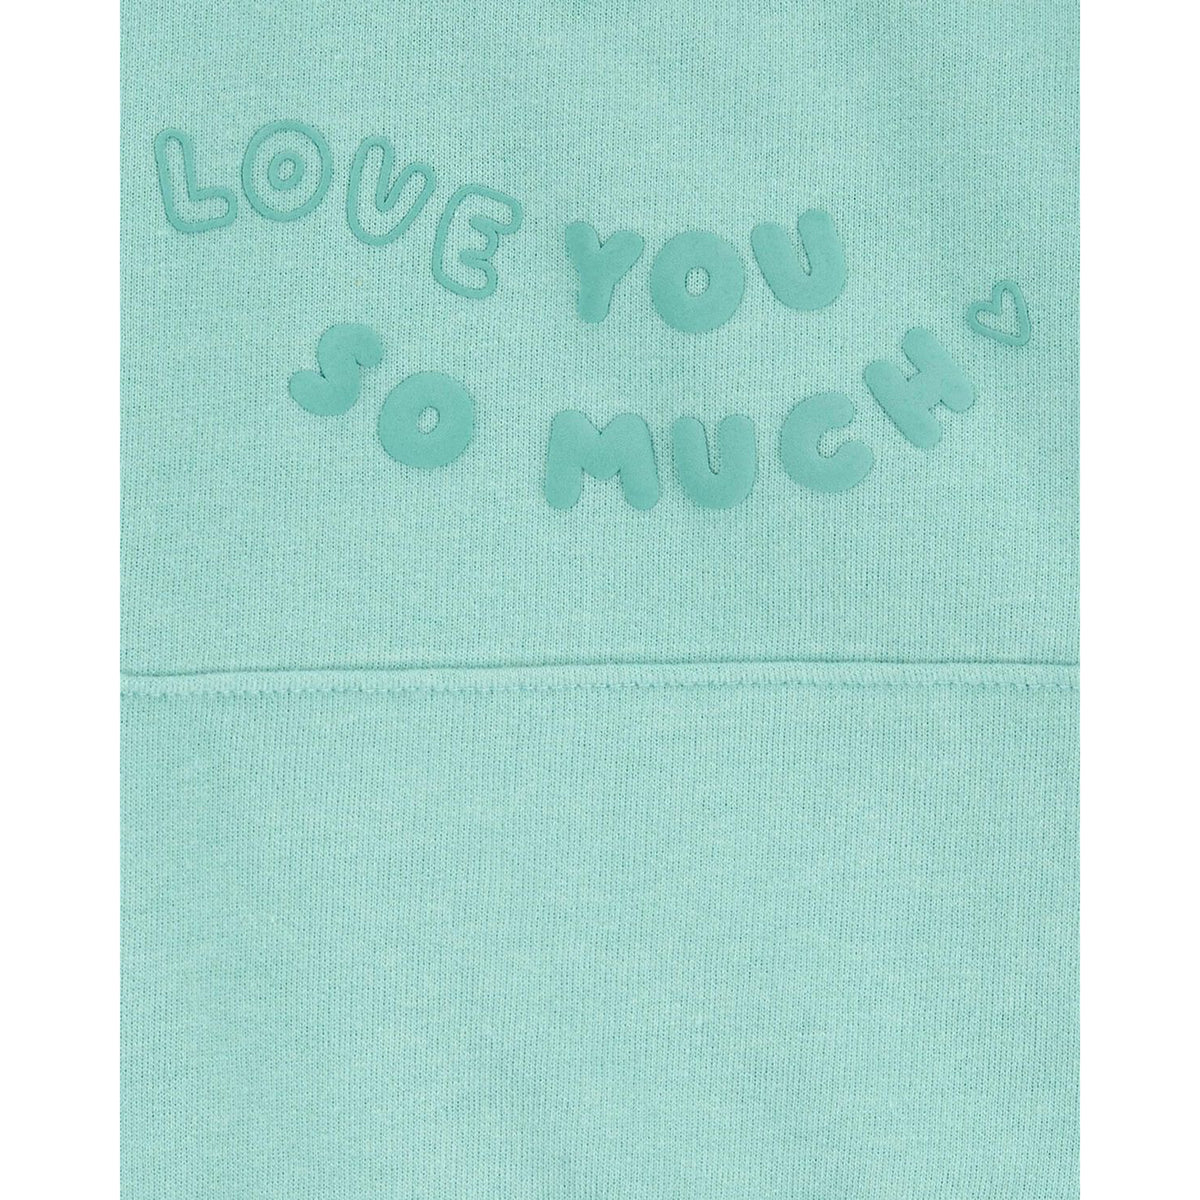 Carter's Love You Top (6M-24M)